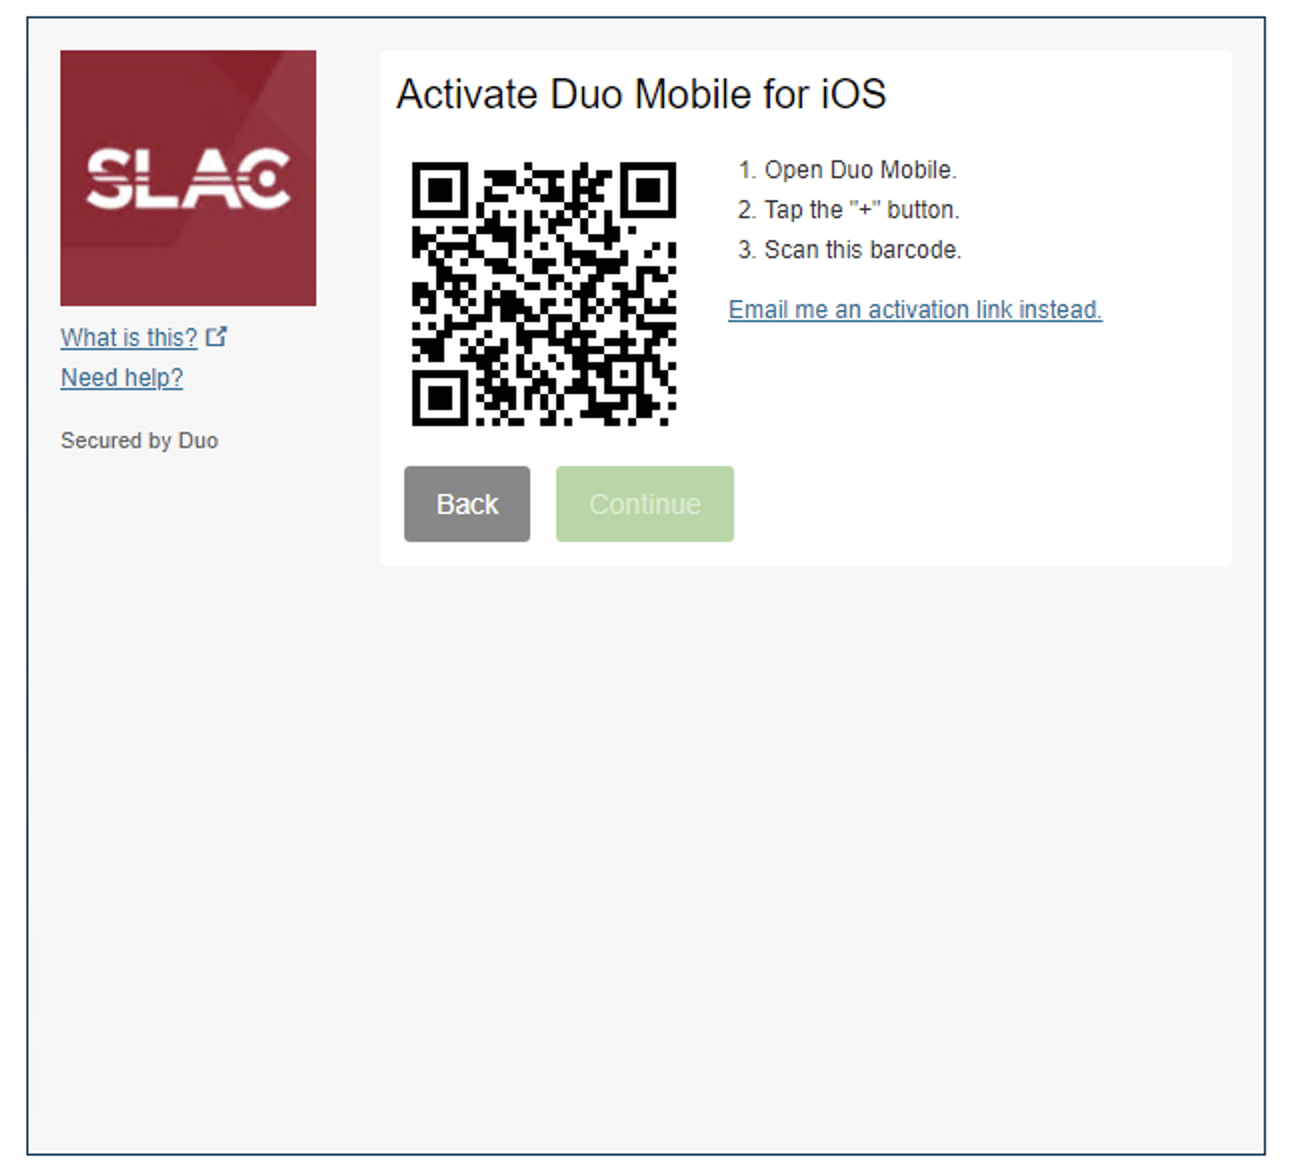 Screenshot of the Duo screen titled "Activate Duo Mobile of iOS"